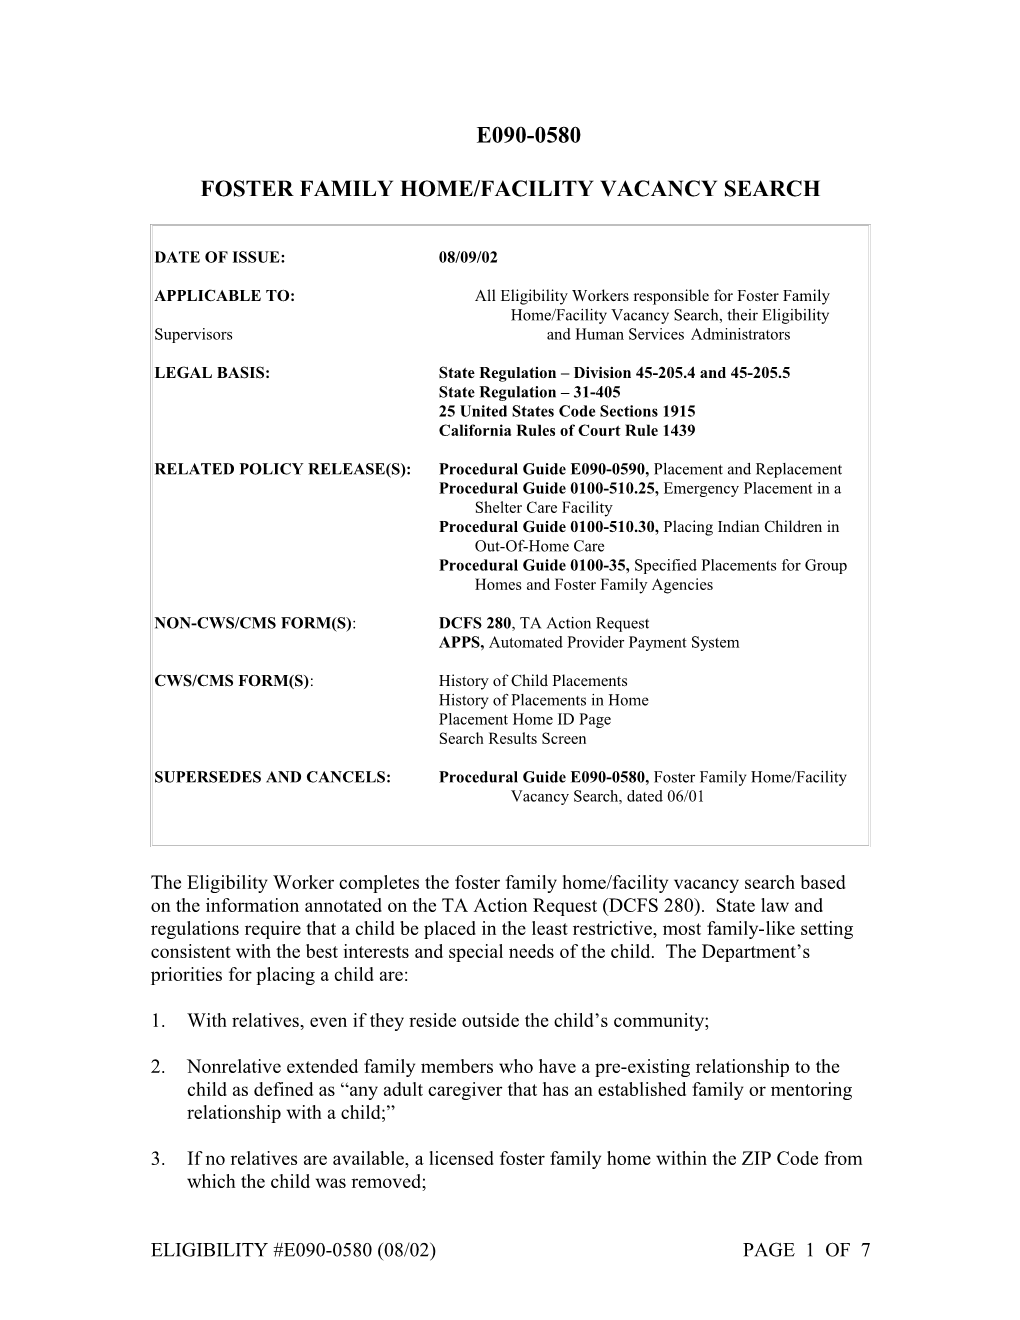 Foster Family Home/Facility Vacancy Search